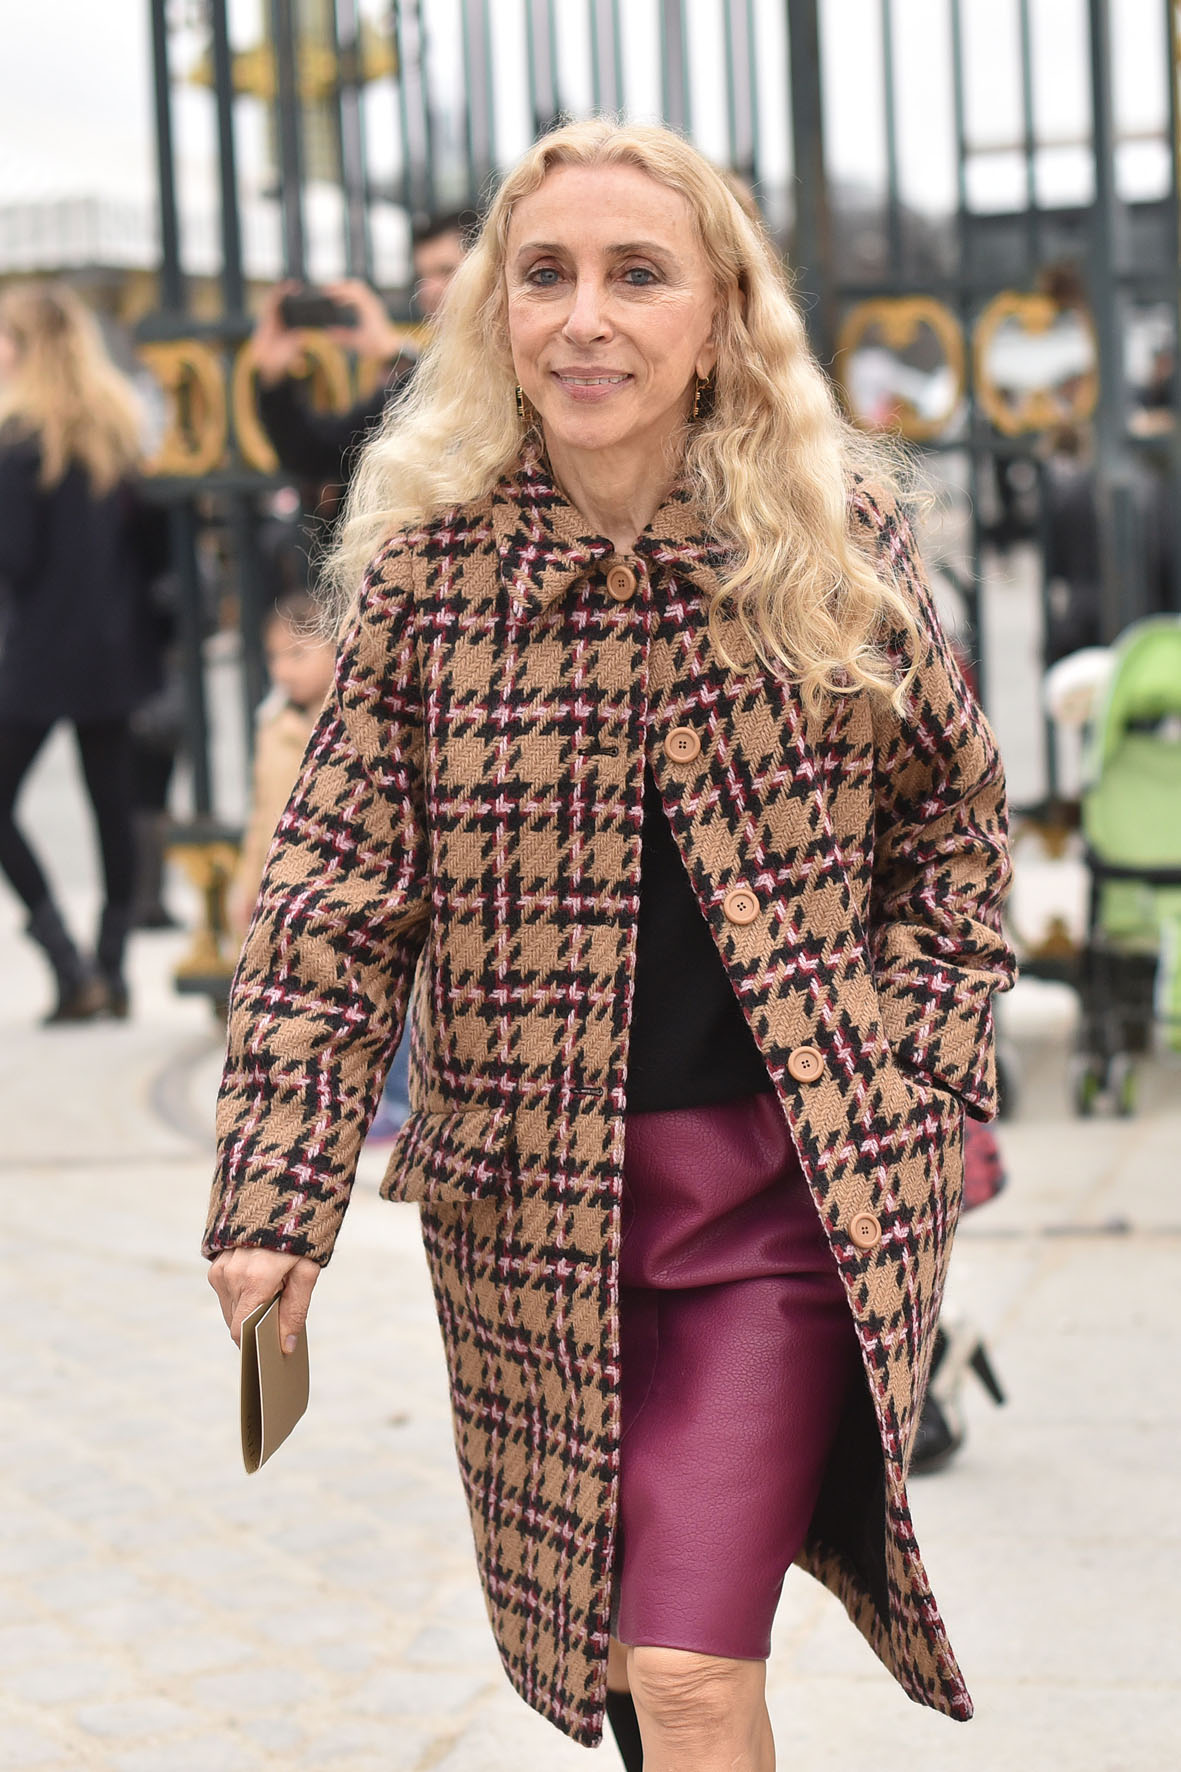 PARIS, FRANCE - MARCH 10: Franca Sozzani arrives at Valentino Fashion Show during Paris Fashion Week Fall Winter 2015/2016 on March 10, 2015 in Paris, France. (Photo by Jacopo Raule/GC Images)